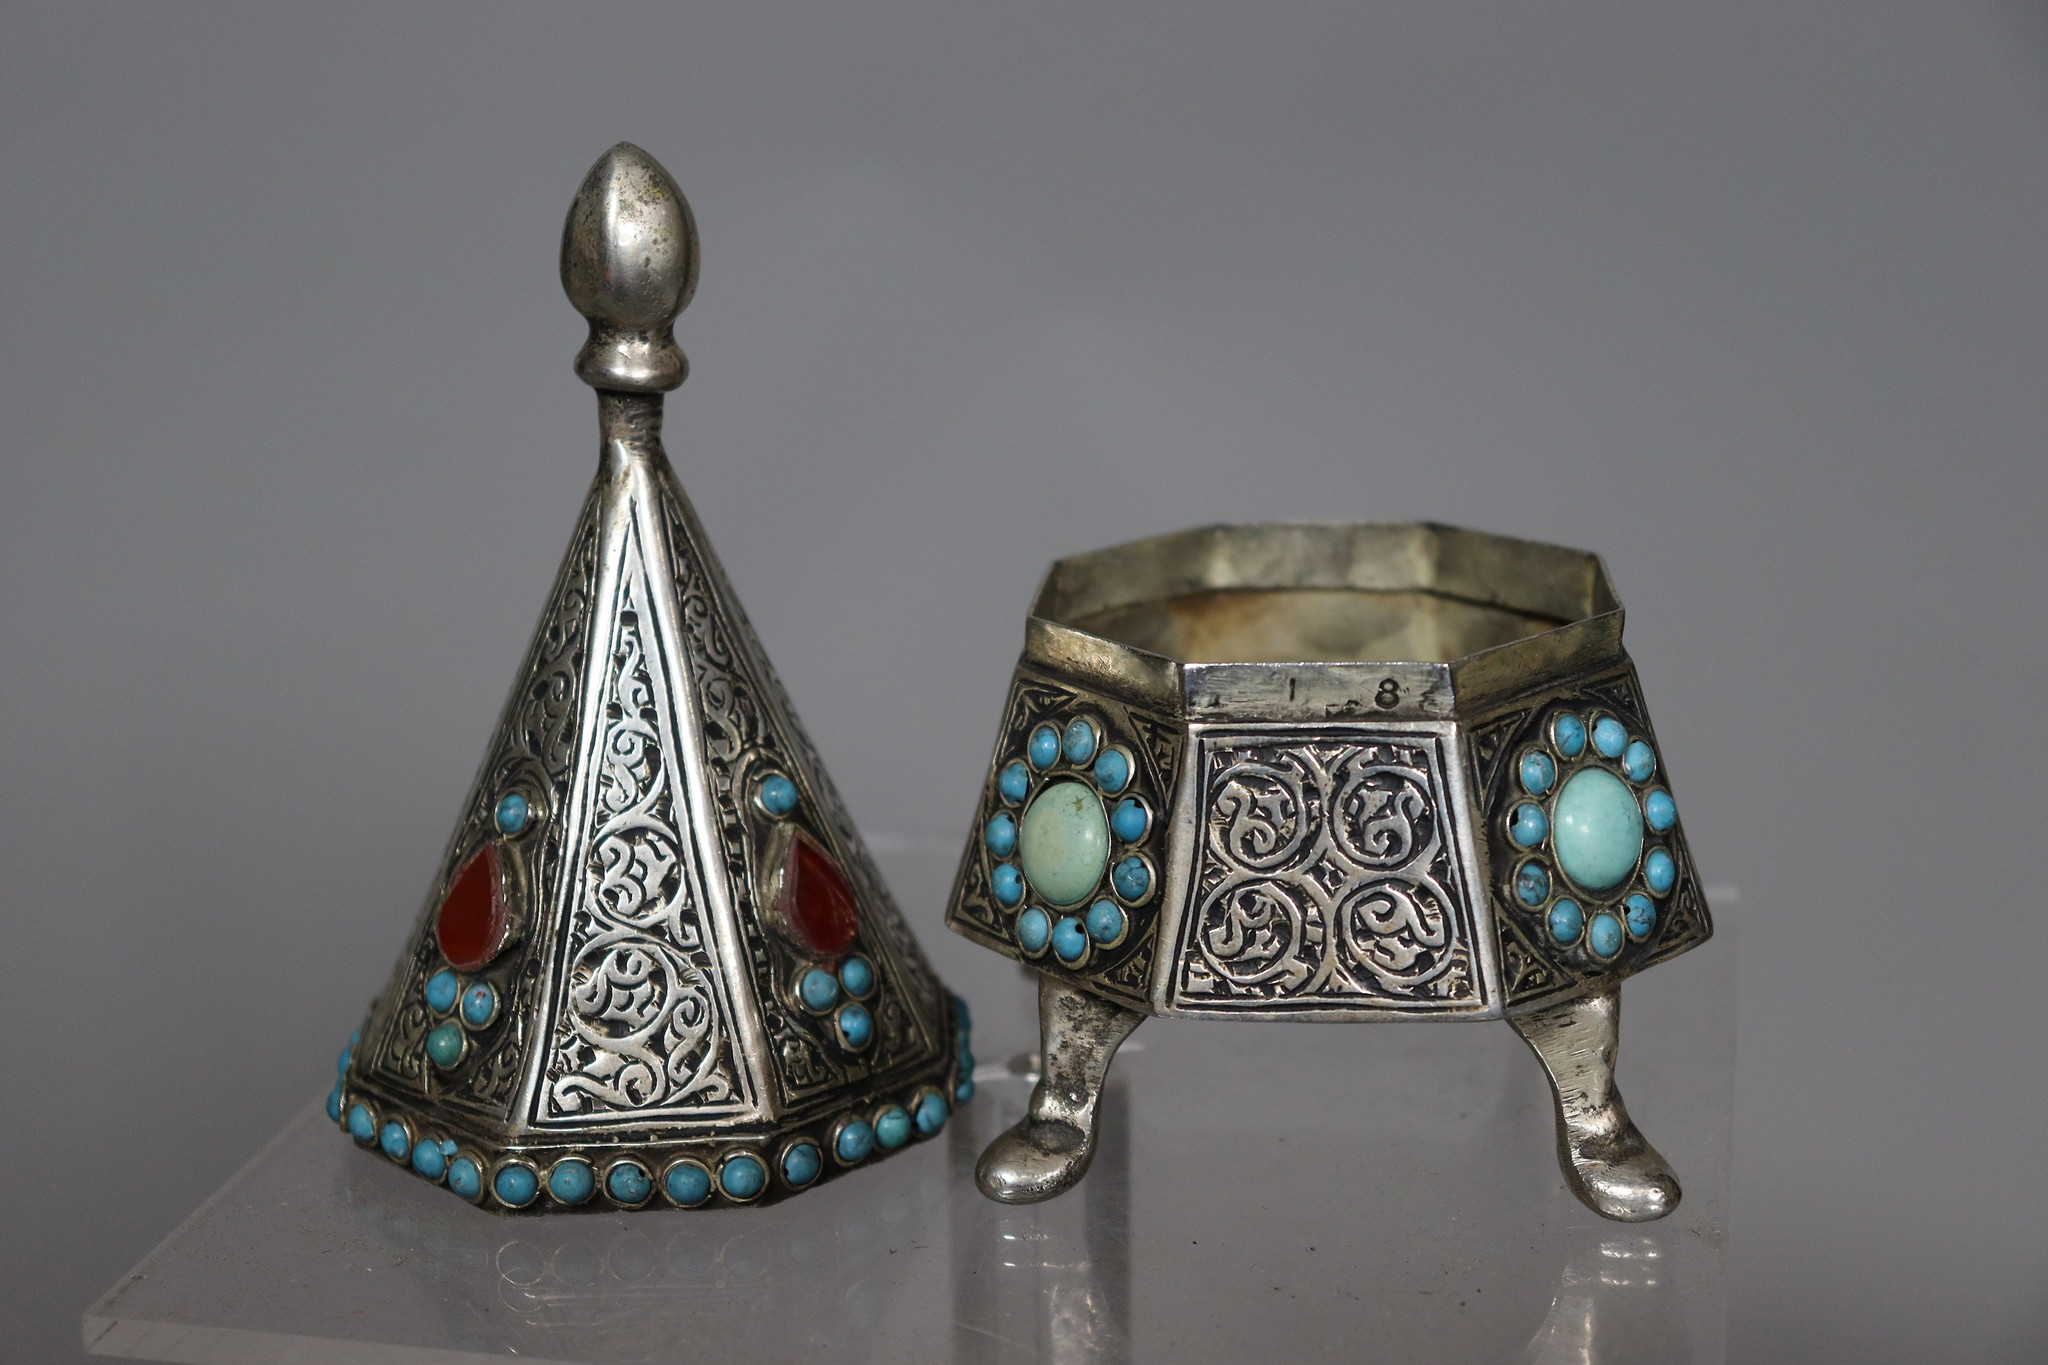 nickel silver box jewelry box casket Lidded Box / Bowl entree dishes Bowl Tureen With Lid  from Afghanistan pyramid 21/B